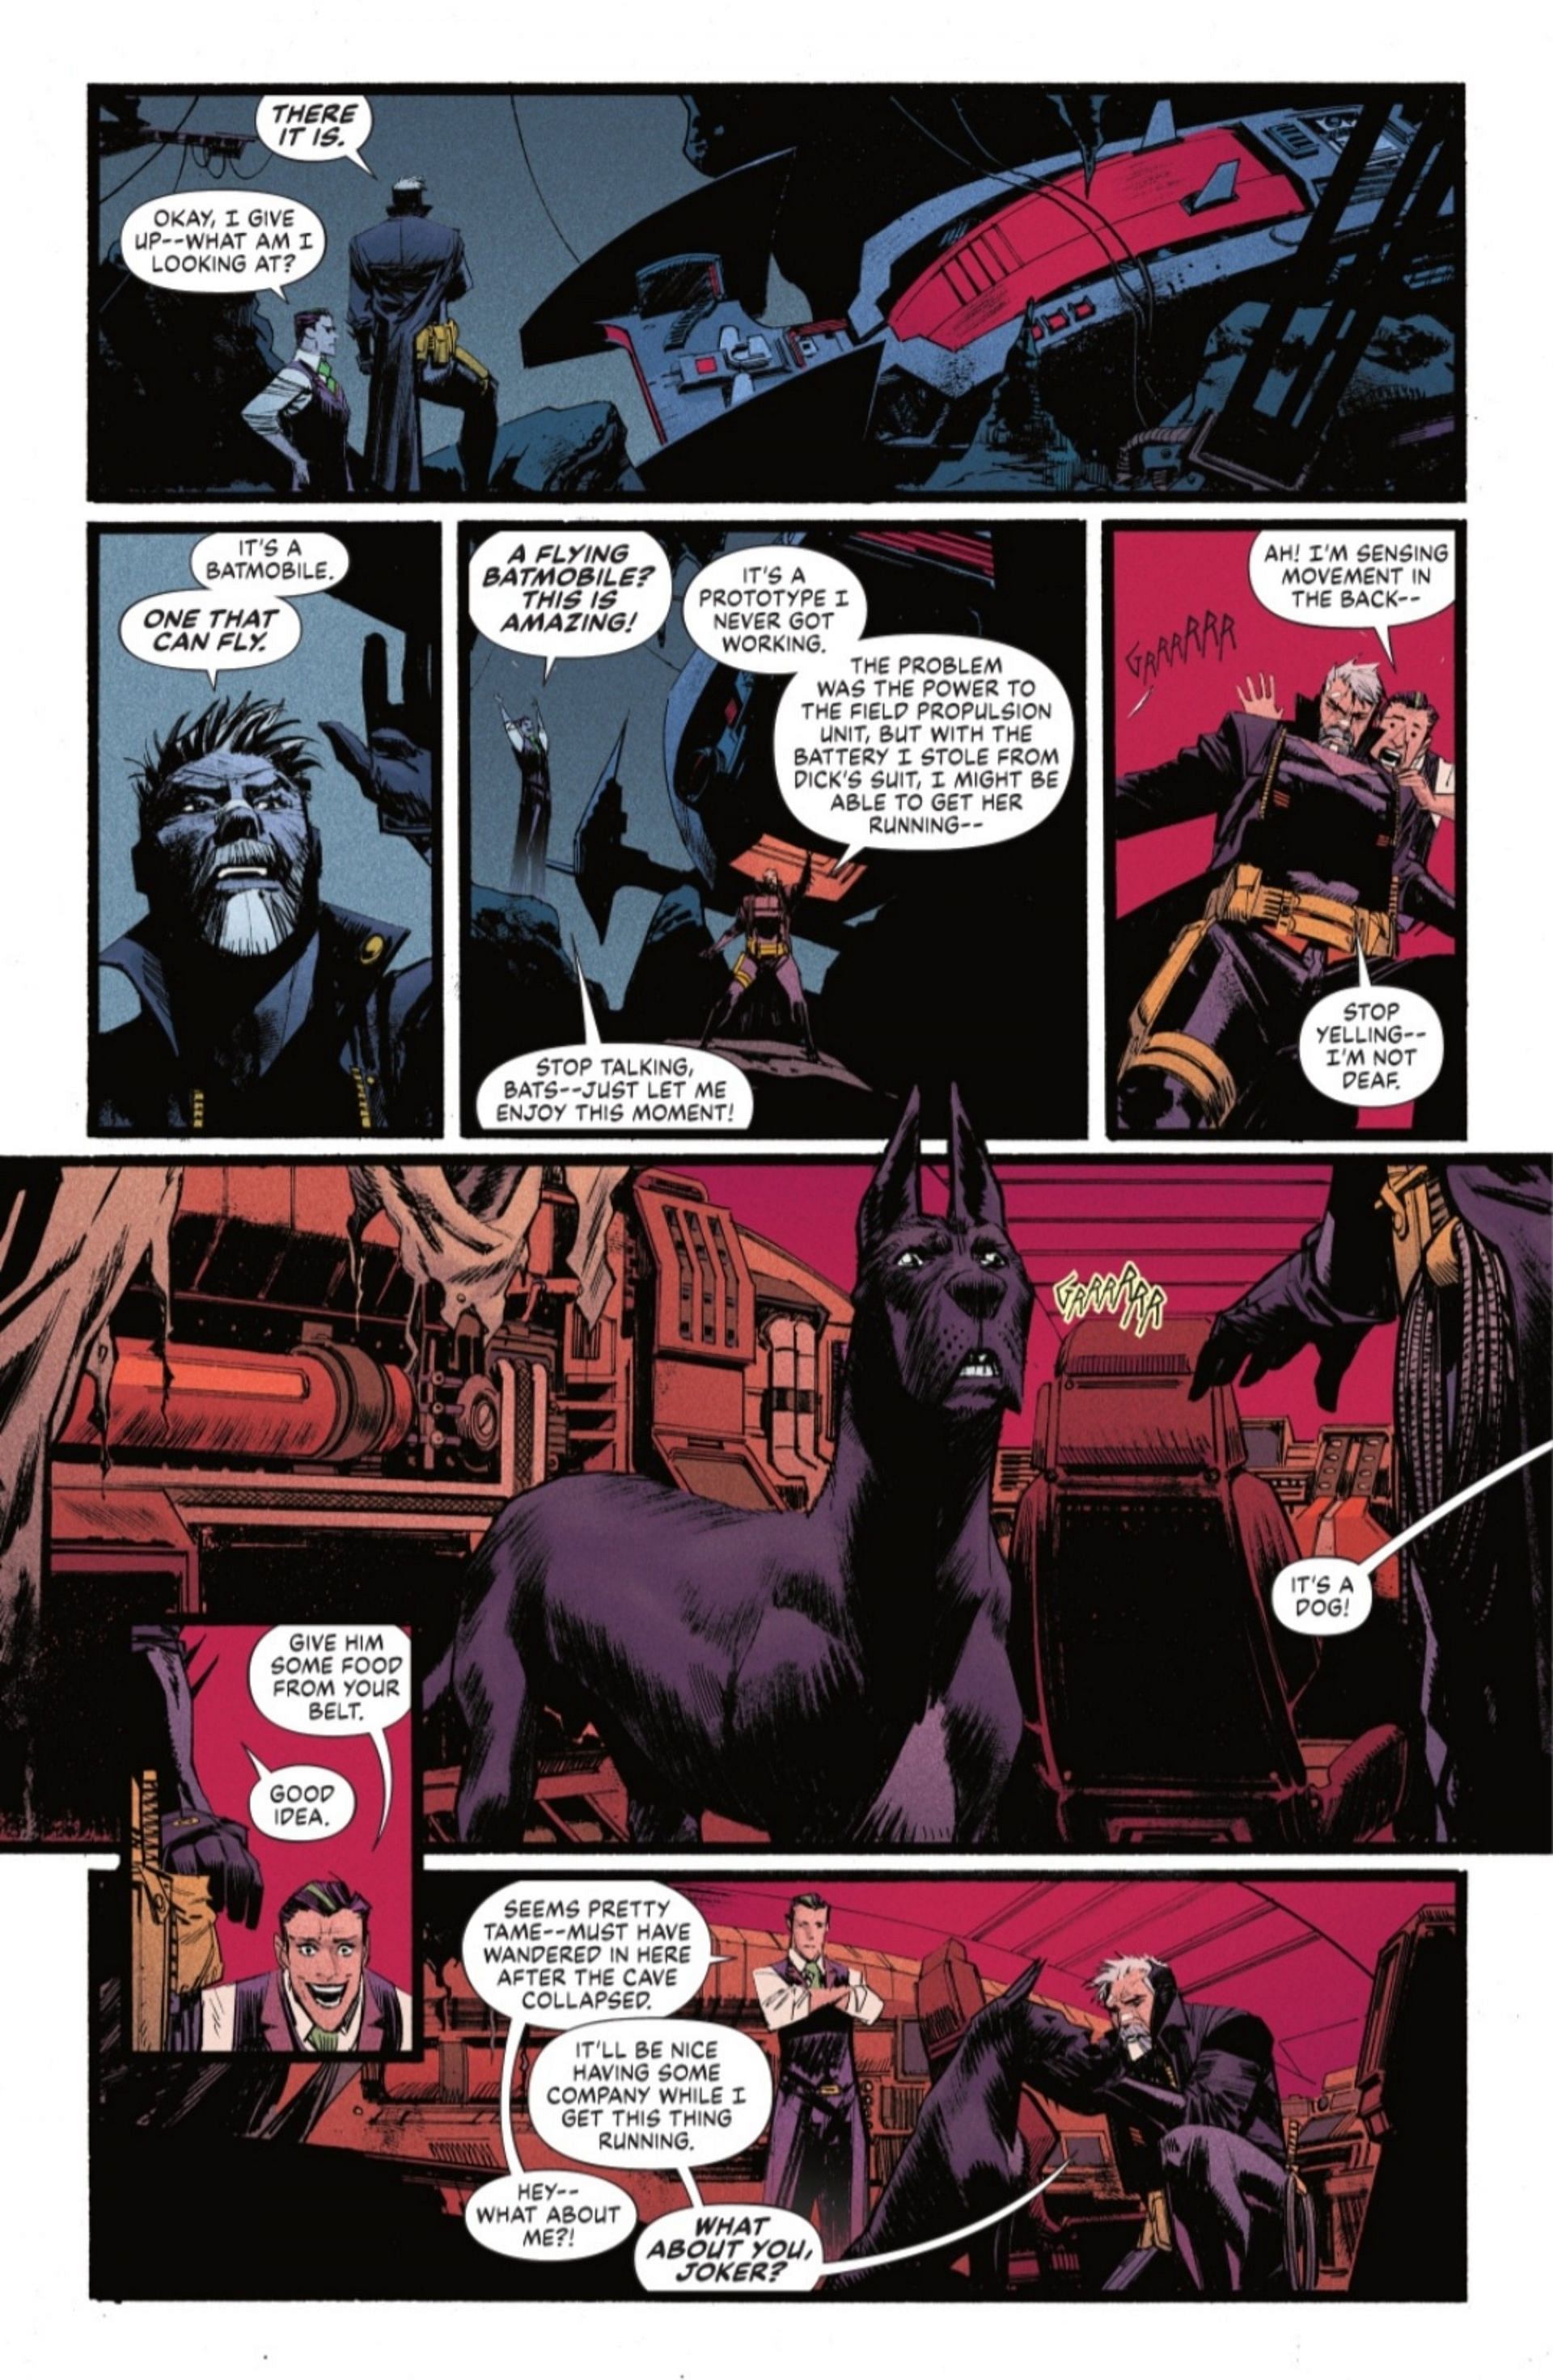 A page from the comic (Image via DC Comics)